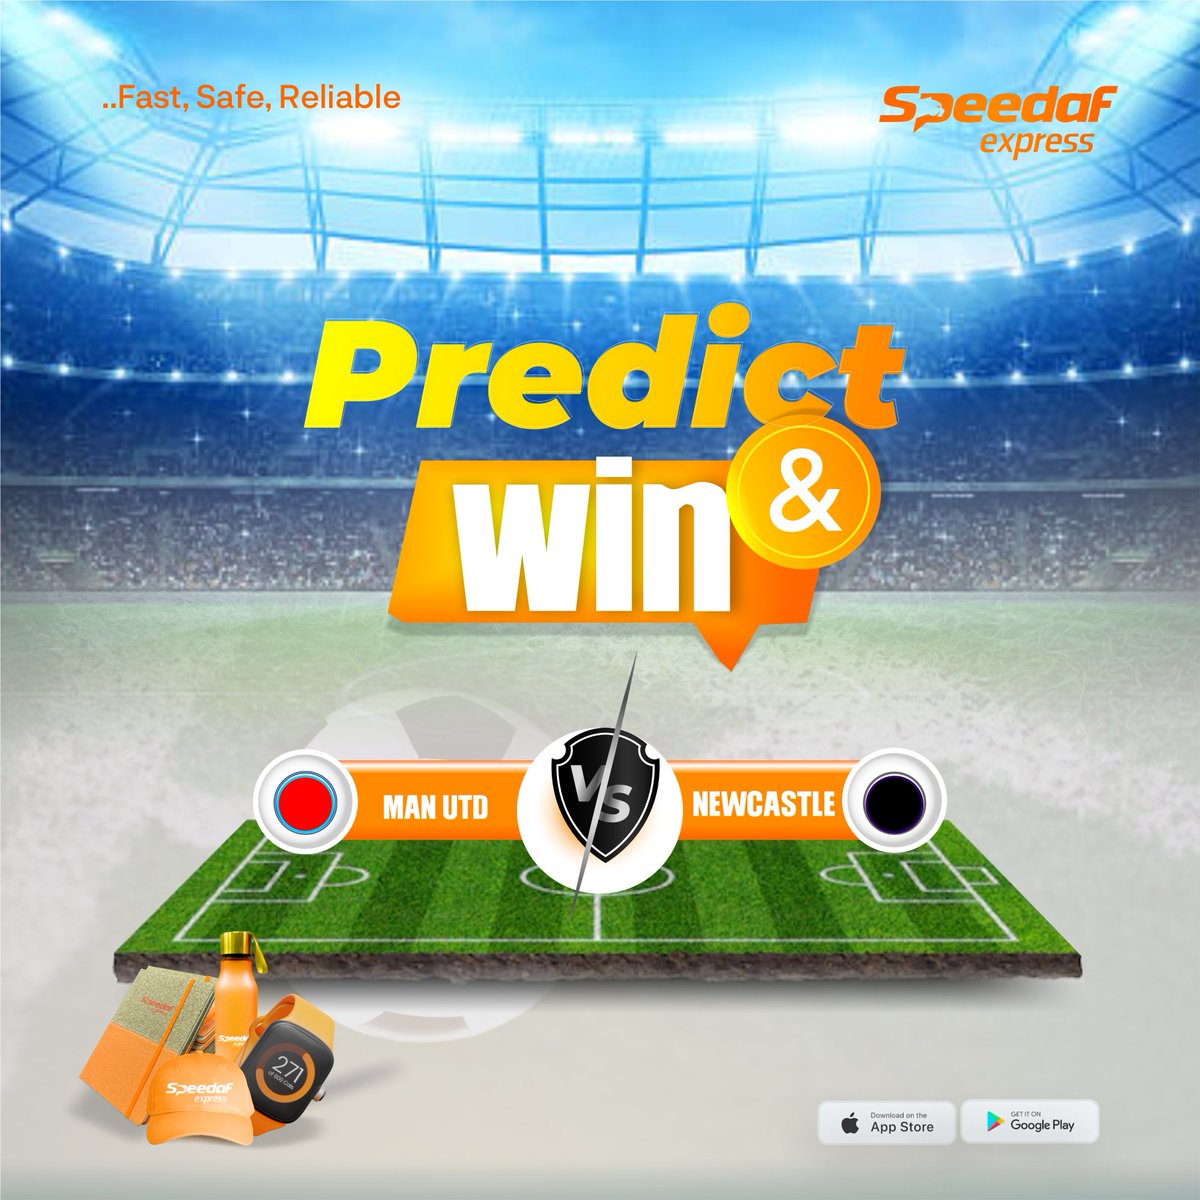 🏆Manchester United vs Newcastle Predict and Win Challenge!

Get ready for an exciting match between Manchester United and Newcastle! ⚽

Predict the final score of the match in the comments below and stand a chance to win exclusive Speedaf Express merchandise! 🎖️🥈🎉

How to…